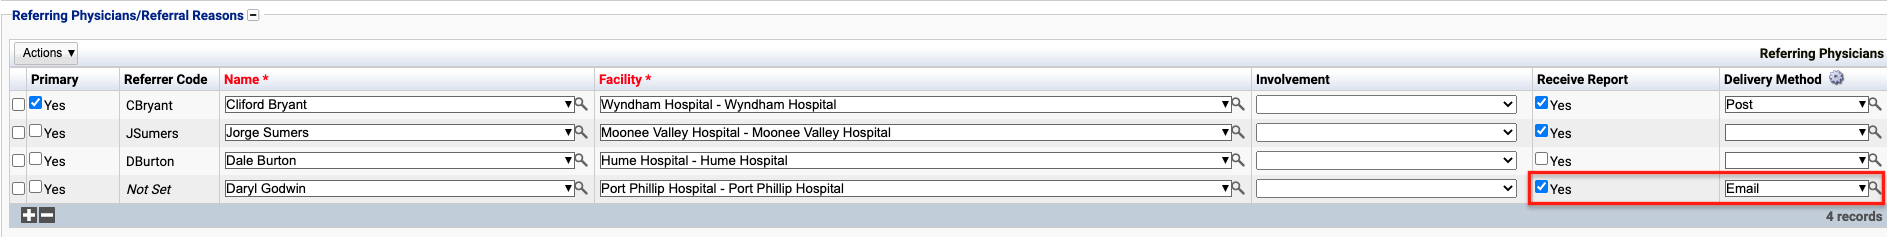 Physicians table in a referral showing Receive Report ticked and Email selected as Delivery Method